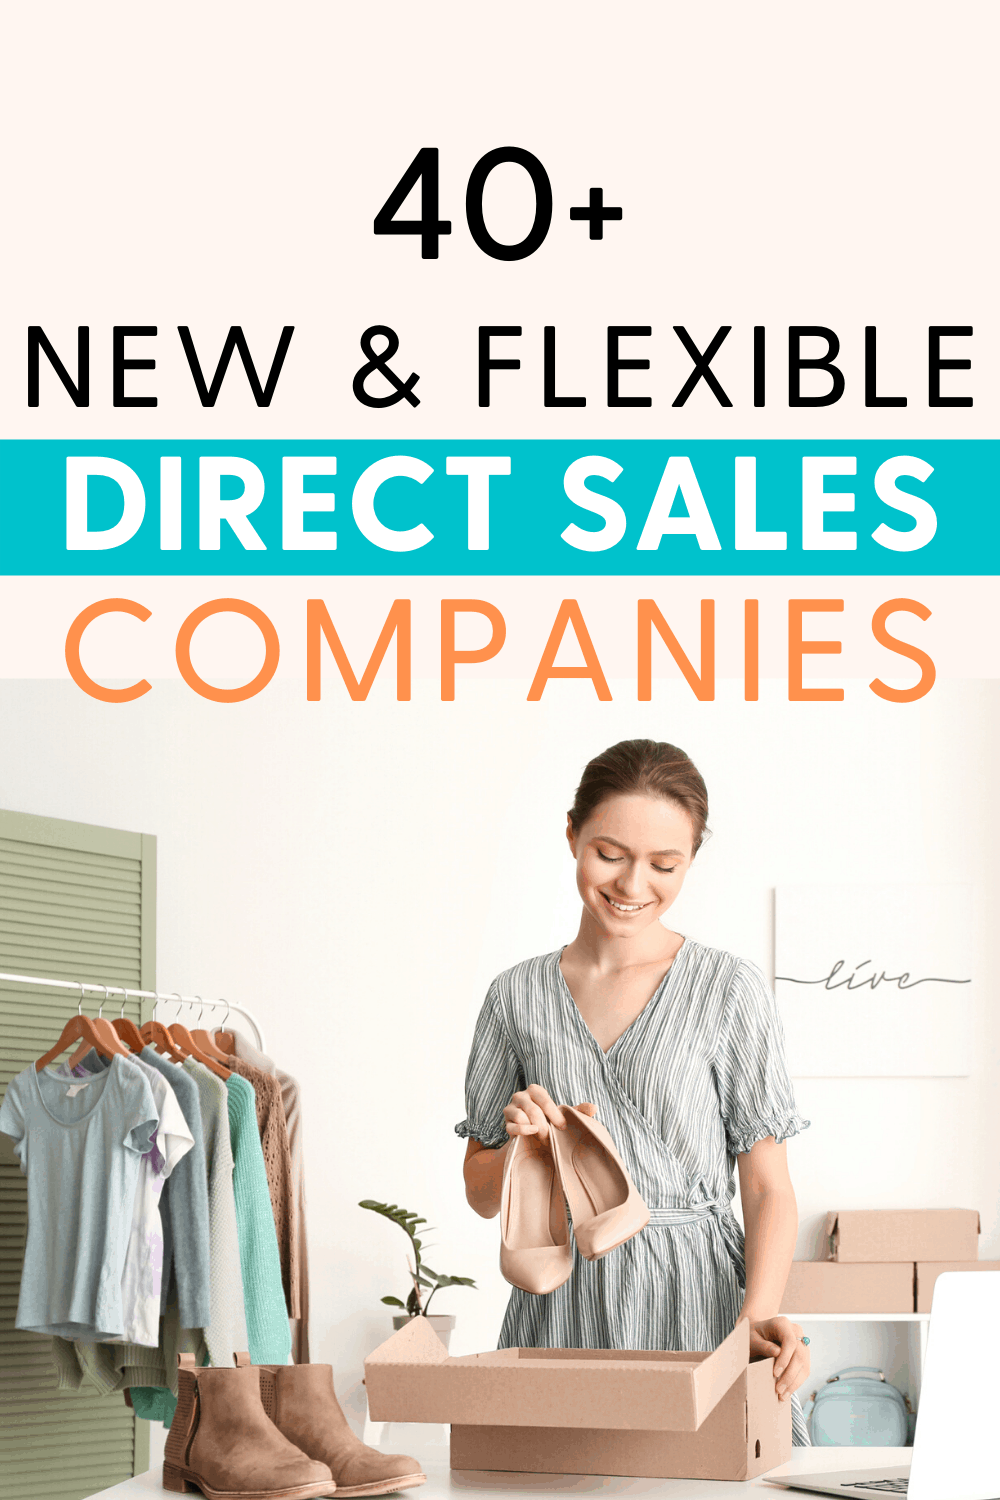 40 Best Direct Sales Companies List 2022 (Flexible for Moms!) - One